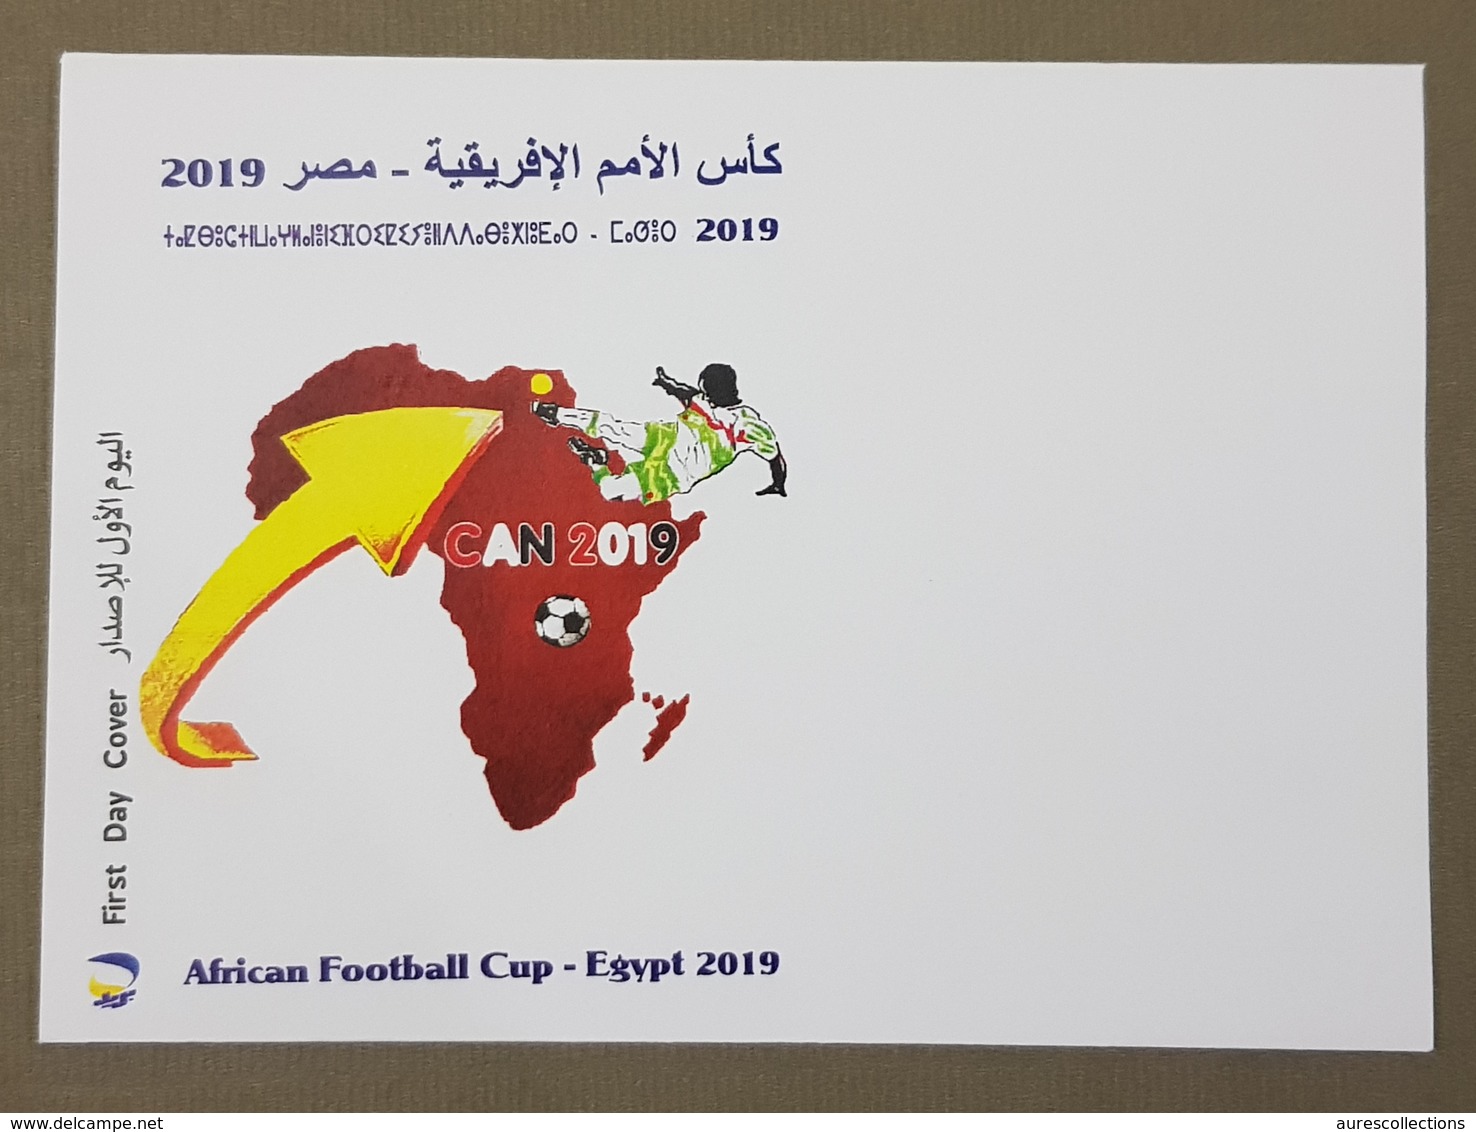 ALGERIE ALGERIA 2019 ERROR SOCCER AFRICA CUP OF NATIONS COUPE AFRIQUE FOOTBALL EGYPT ODD SHAPE CIRCULAR EMPTY FDC - Afrika Cup